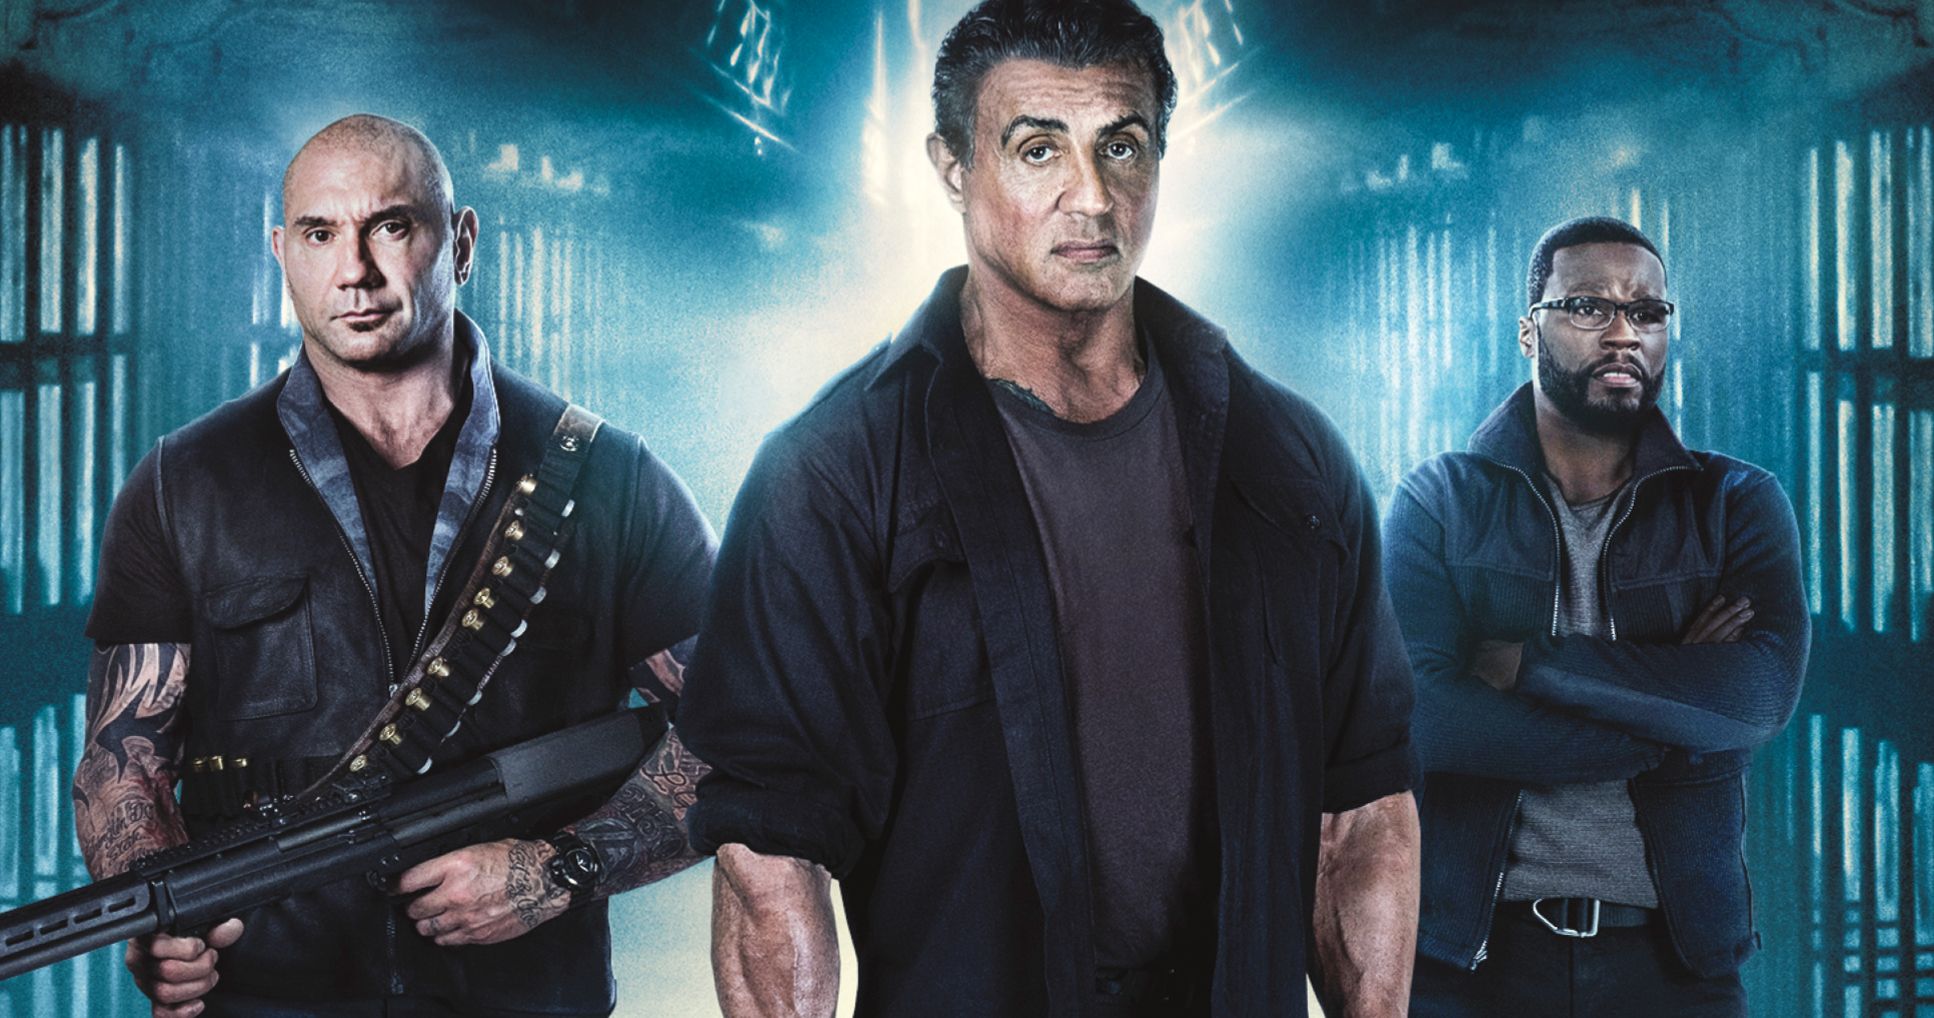 Escape Plan: The Extractors Trailer Locks Stallone in Most Impenetrable Prison Yet